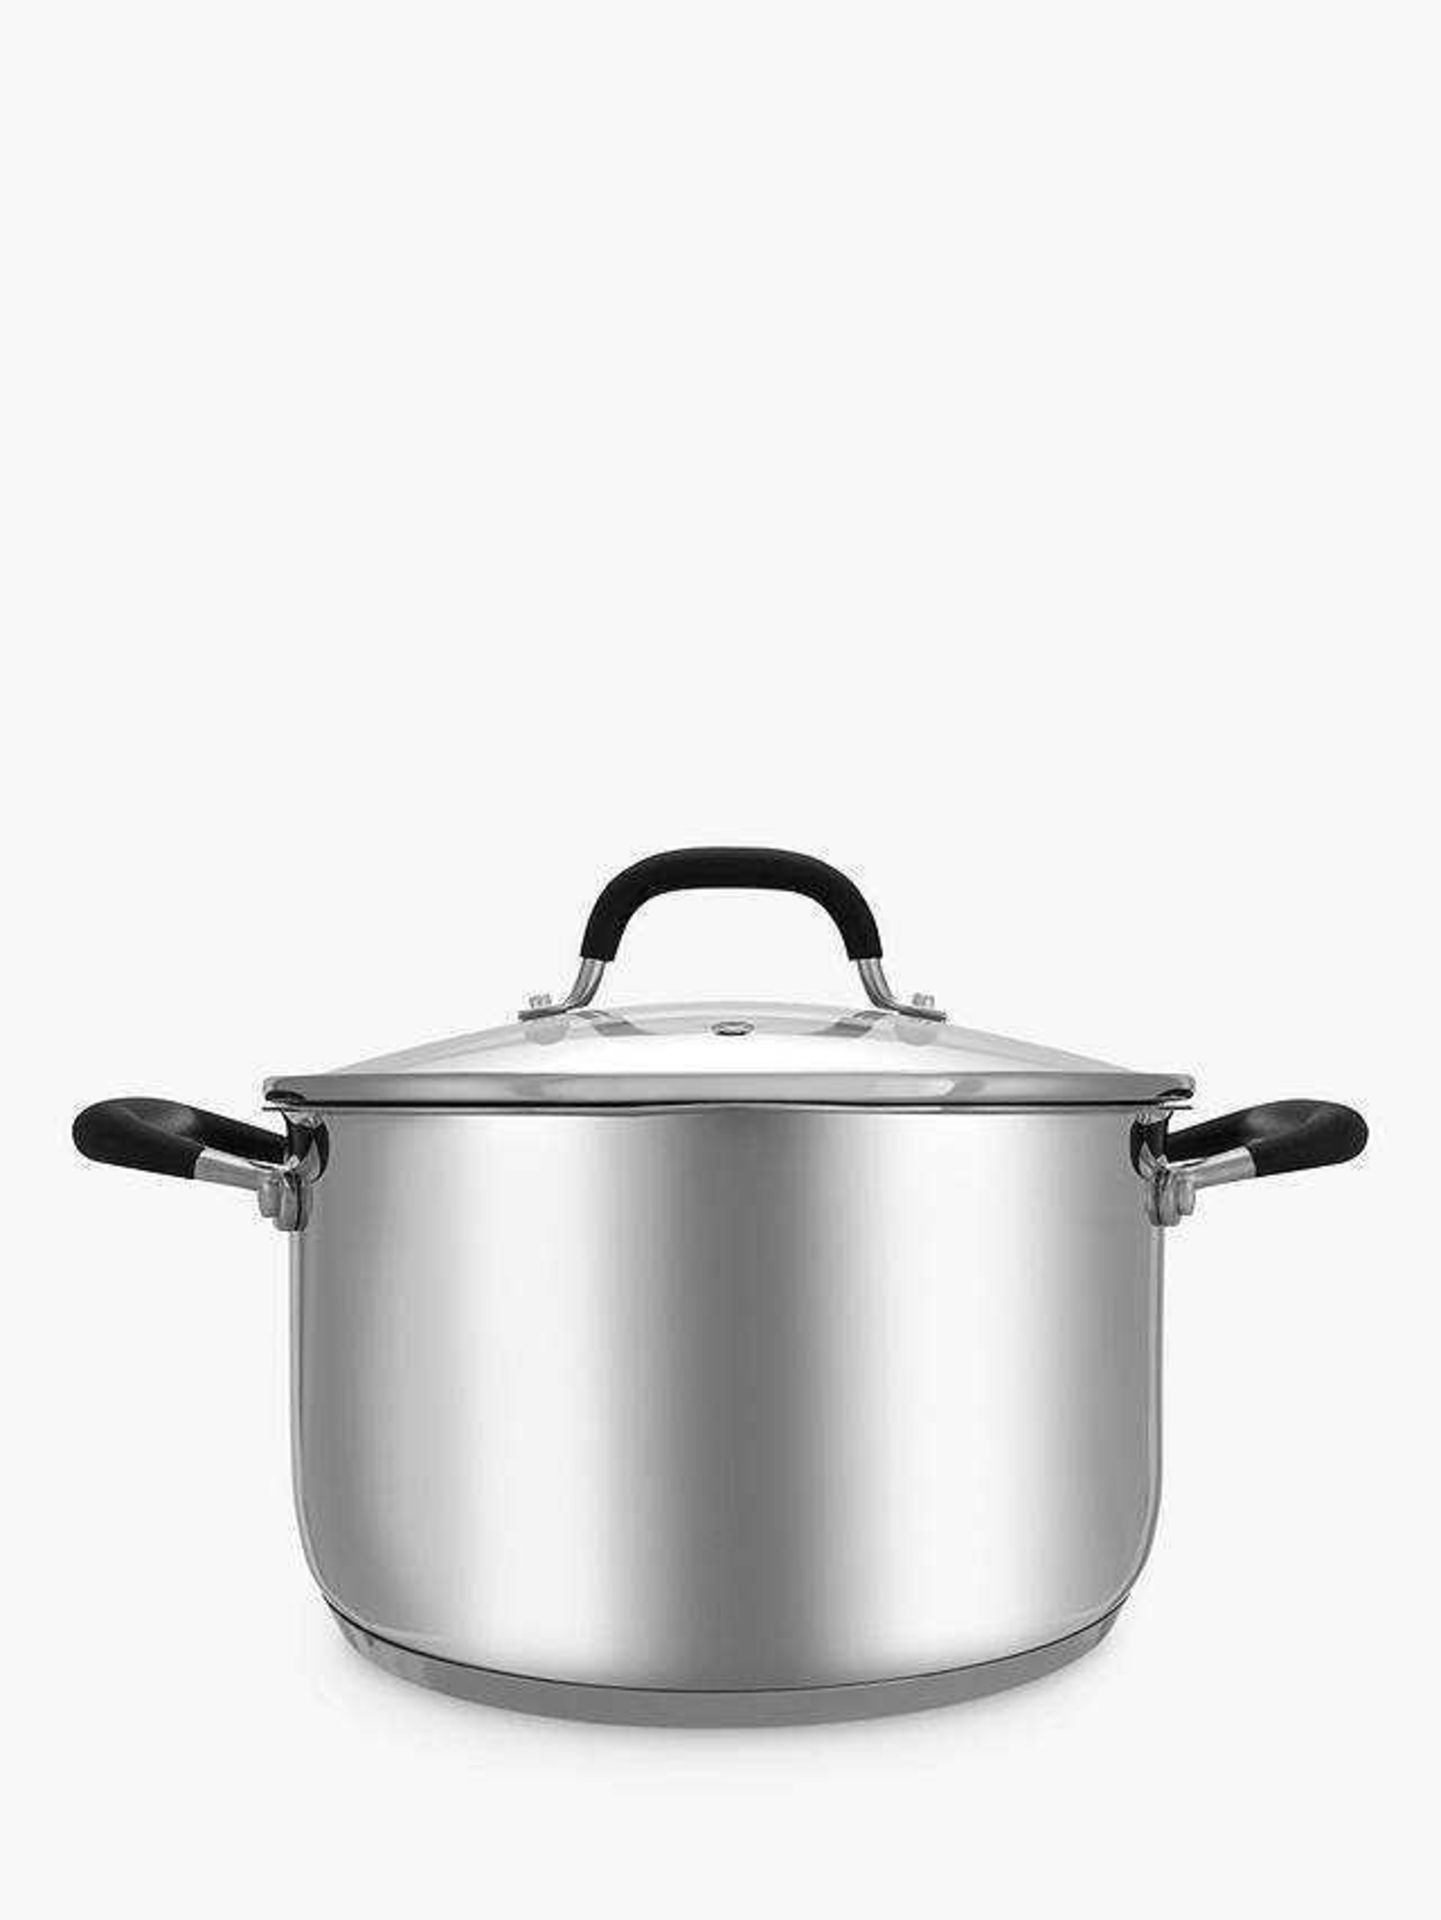 (At) RRP £395 Lot To Contain 1 X John Lewis Stockpot With Lid 1 X John Lewis SautÃ© Pan With Lid 1 X - Image 2 of 12